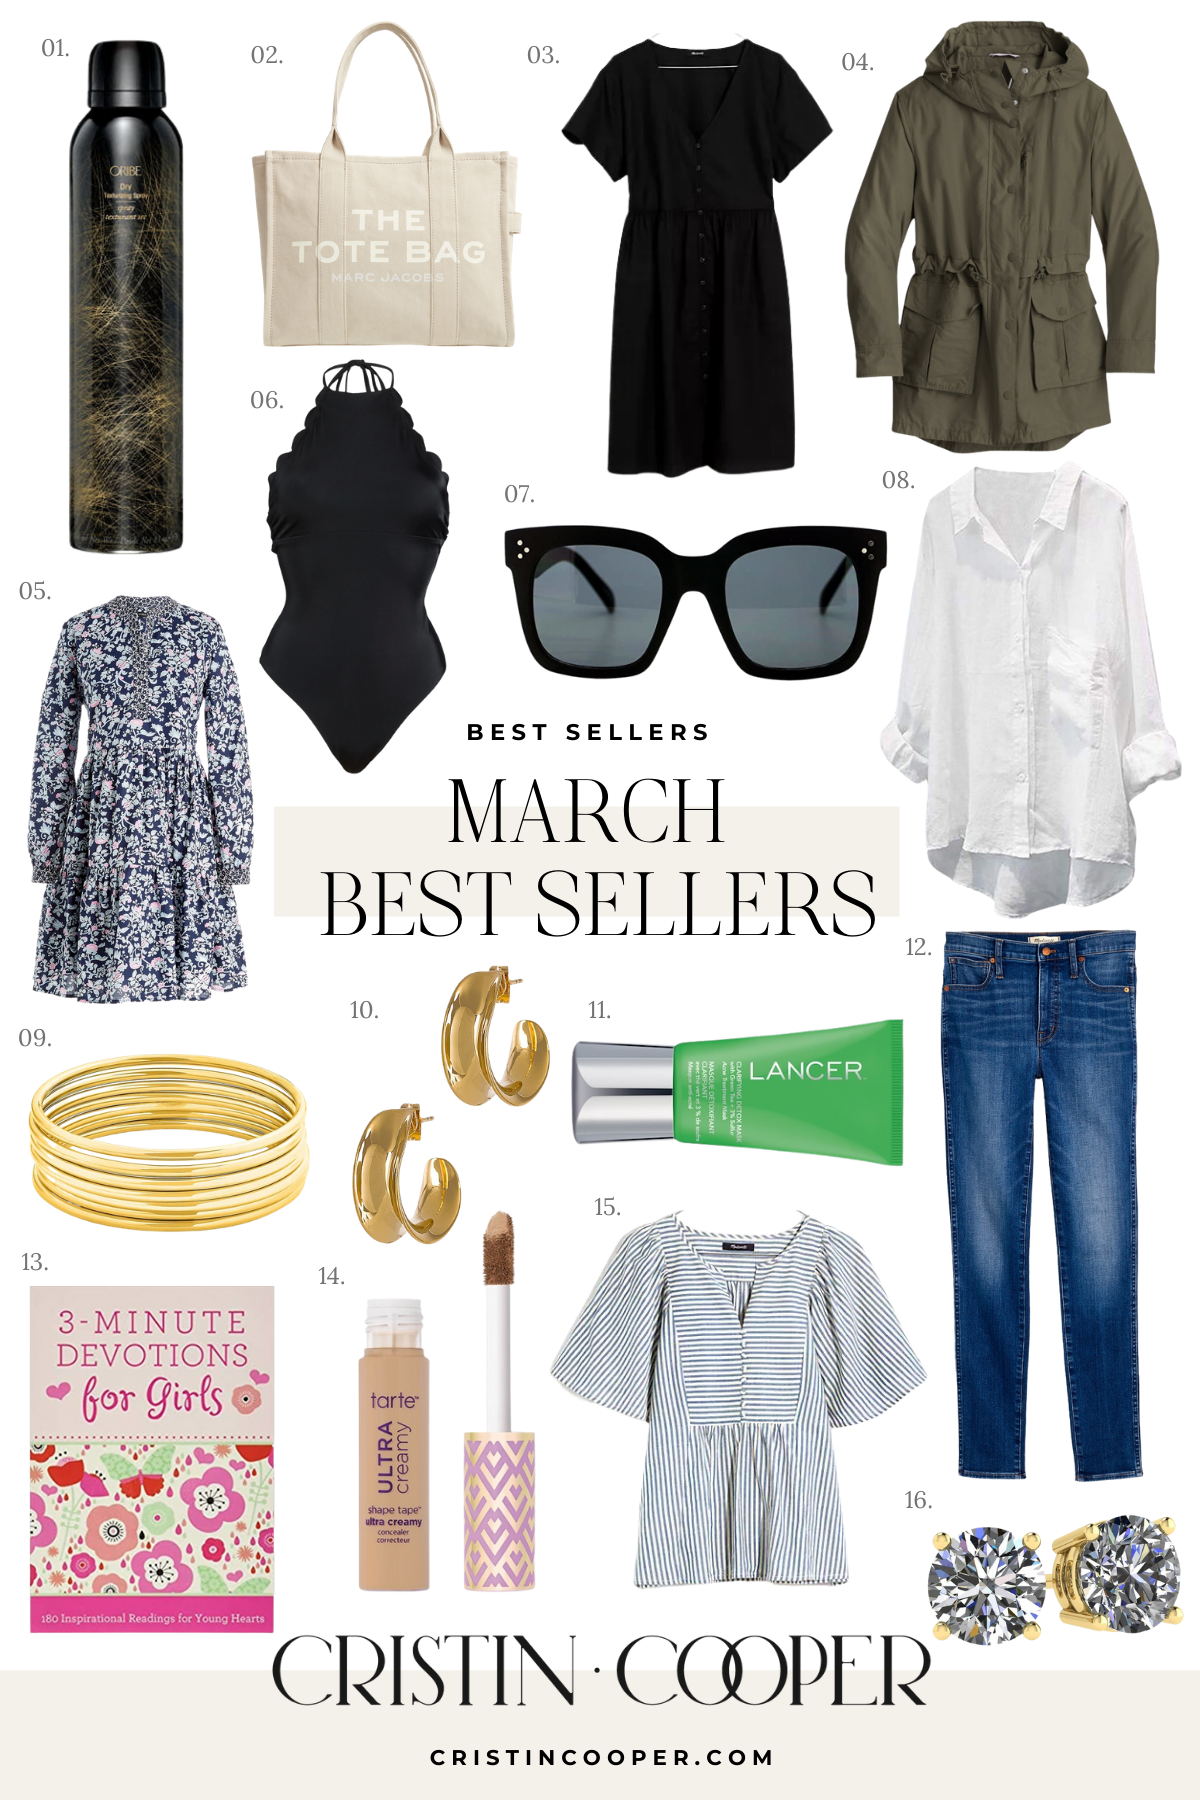 Cristin Cooper March Best Sellers